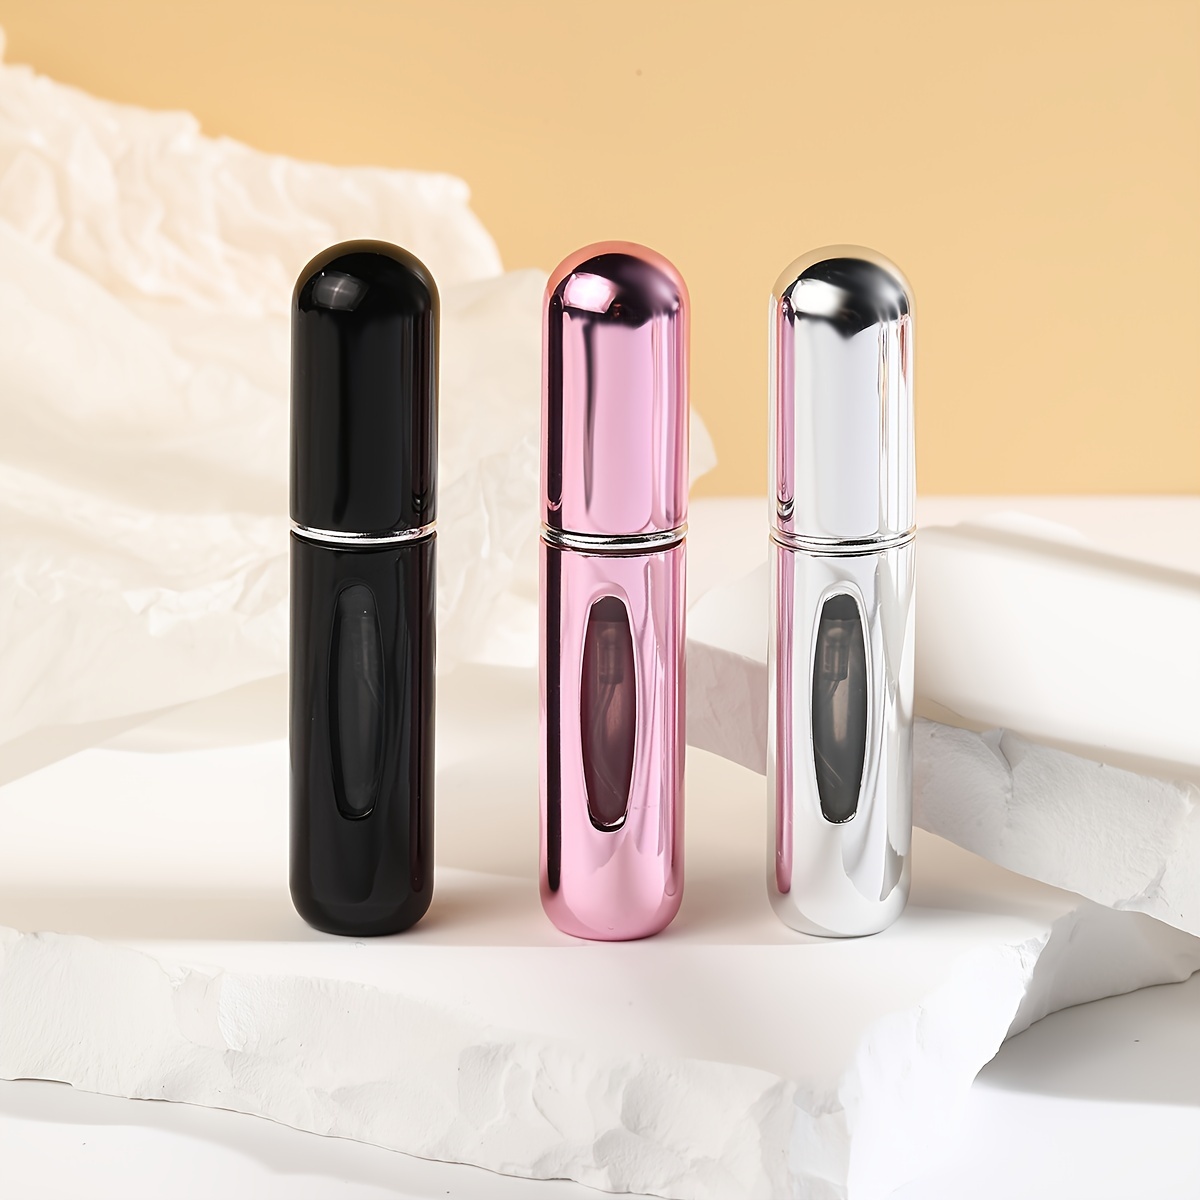 

3pcs, Portable Refillable Perfume Spray Bottles, Bottom-fill Perfume Atomizer, Travel-sized Mini Sprayer For Fragrance & Skincare, Round-top Self-pump, Beauty & Personal Care Accessory